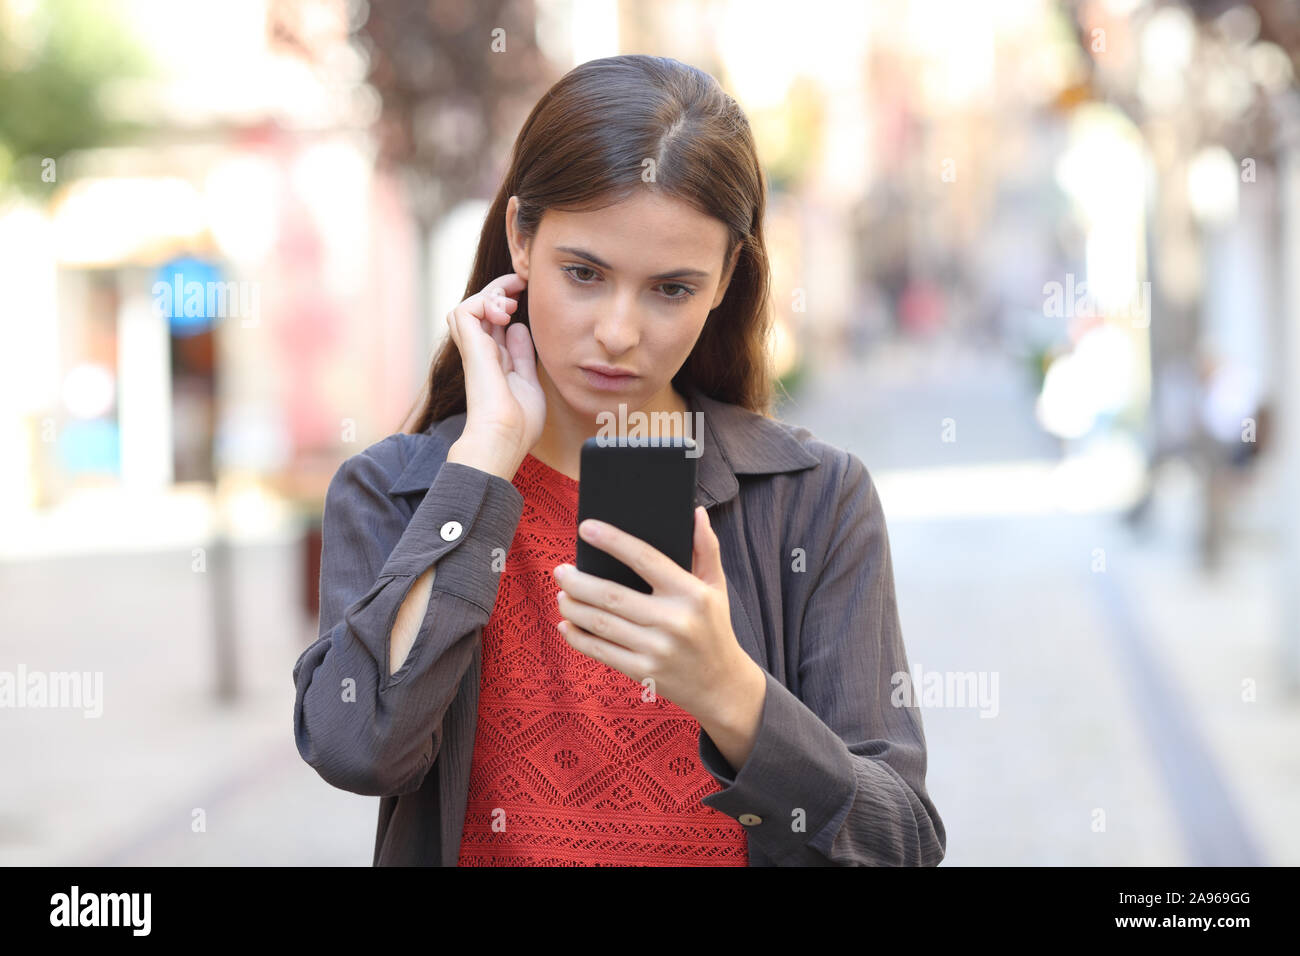 Front view of a serious girl using mobile phone touching hair walking in the street Stock Photo